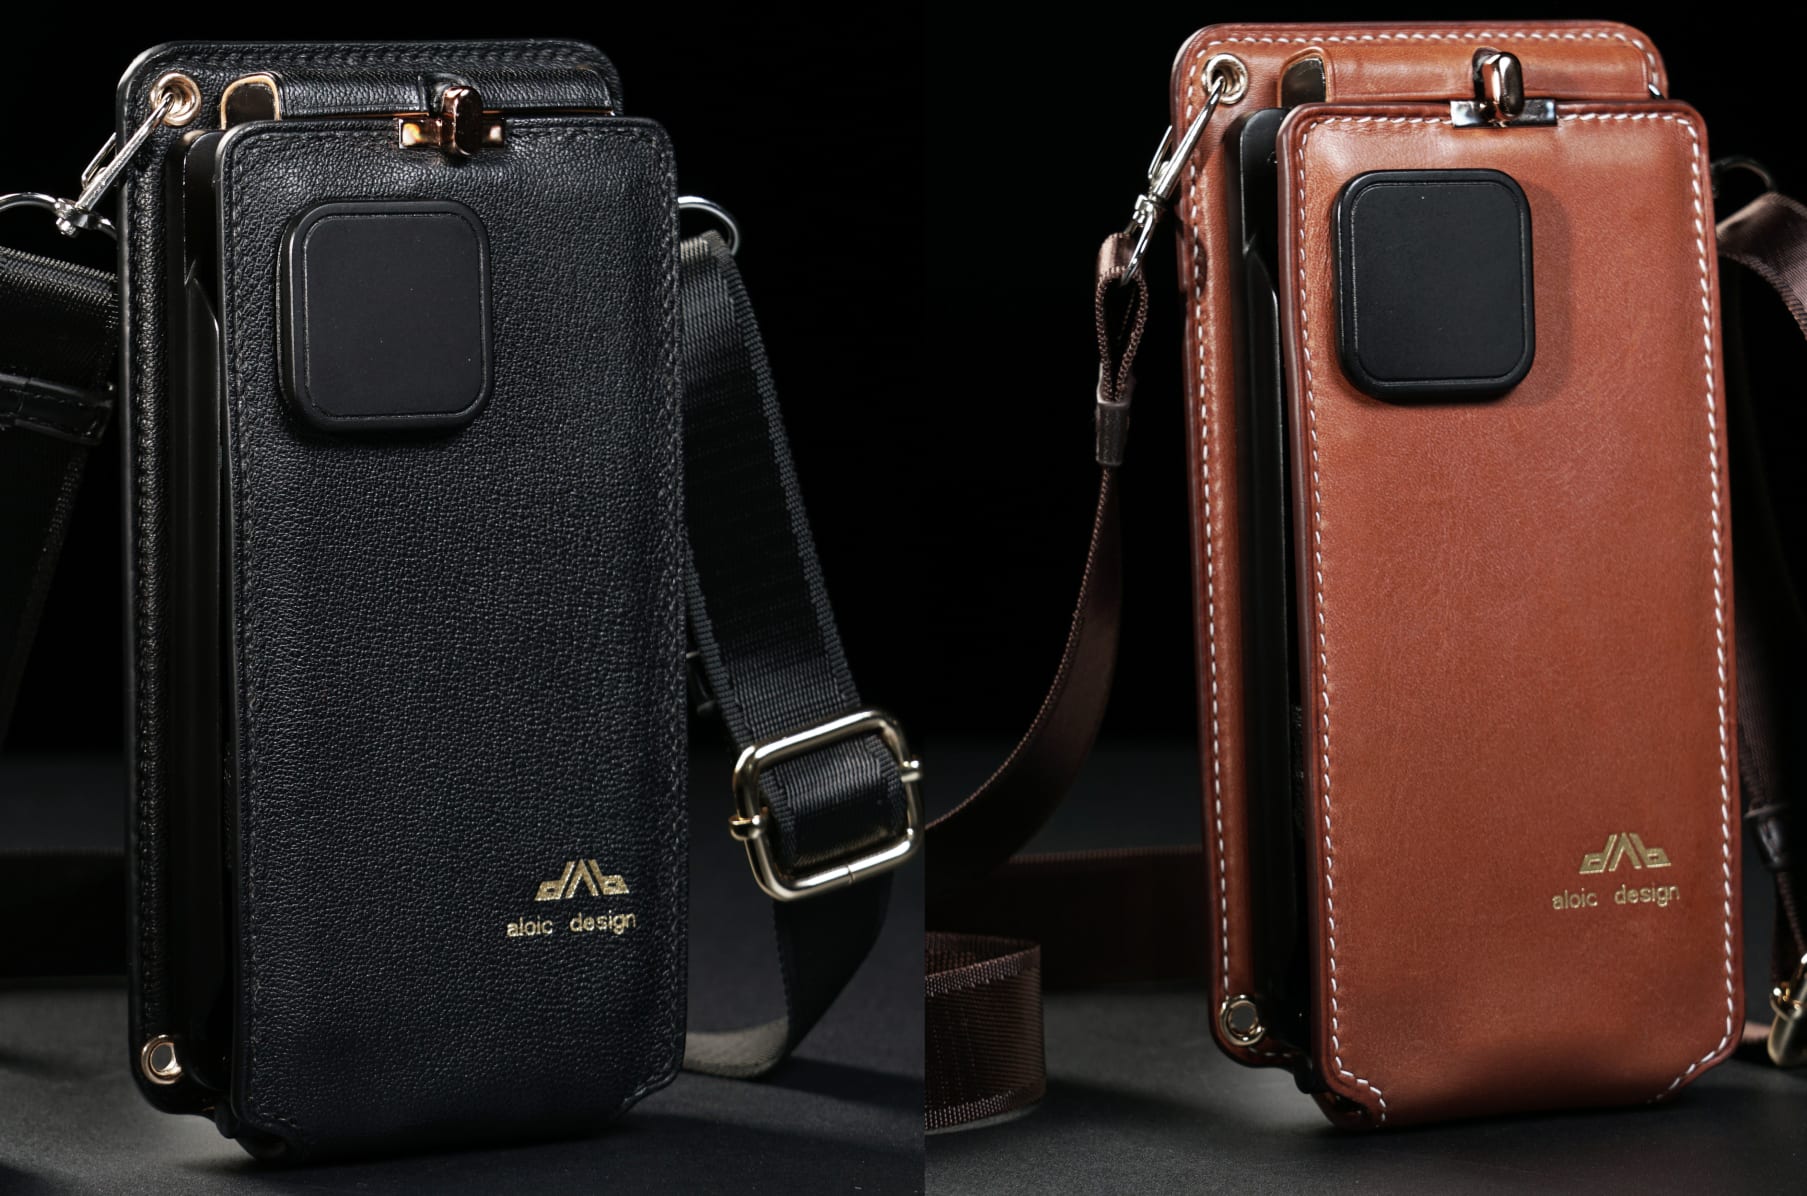 Double-Hold: The First Bag with Phone Bracket